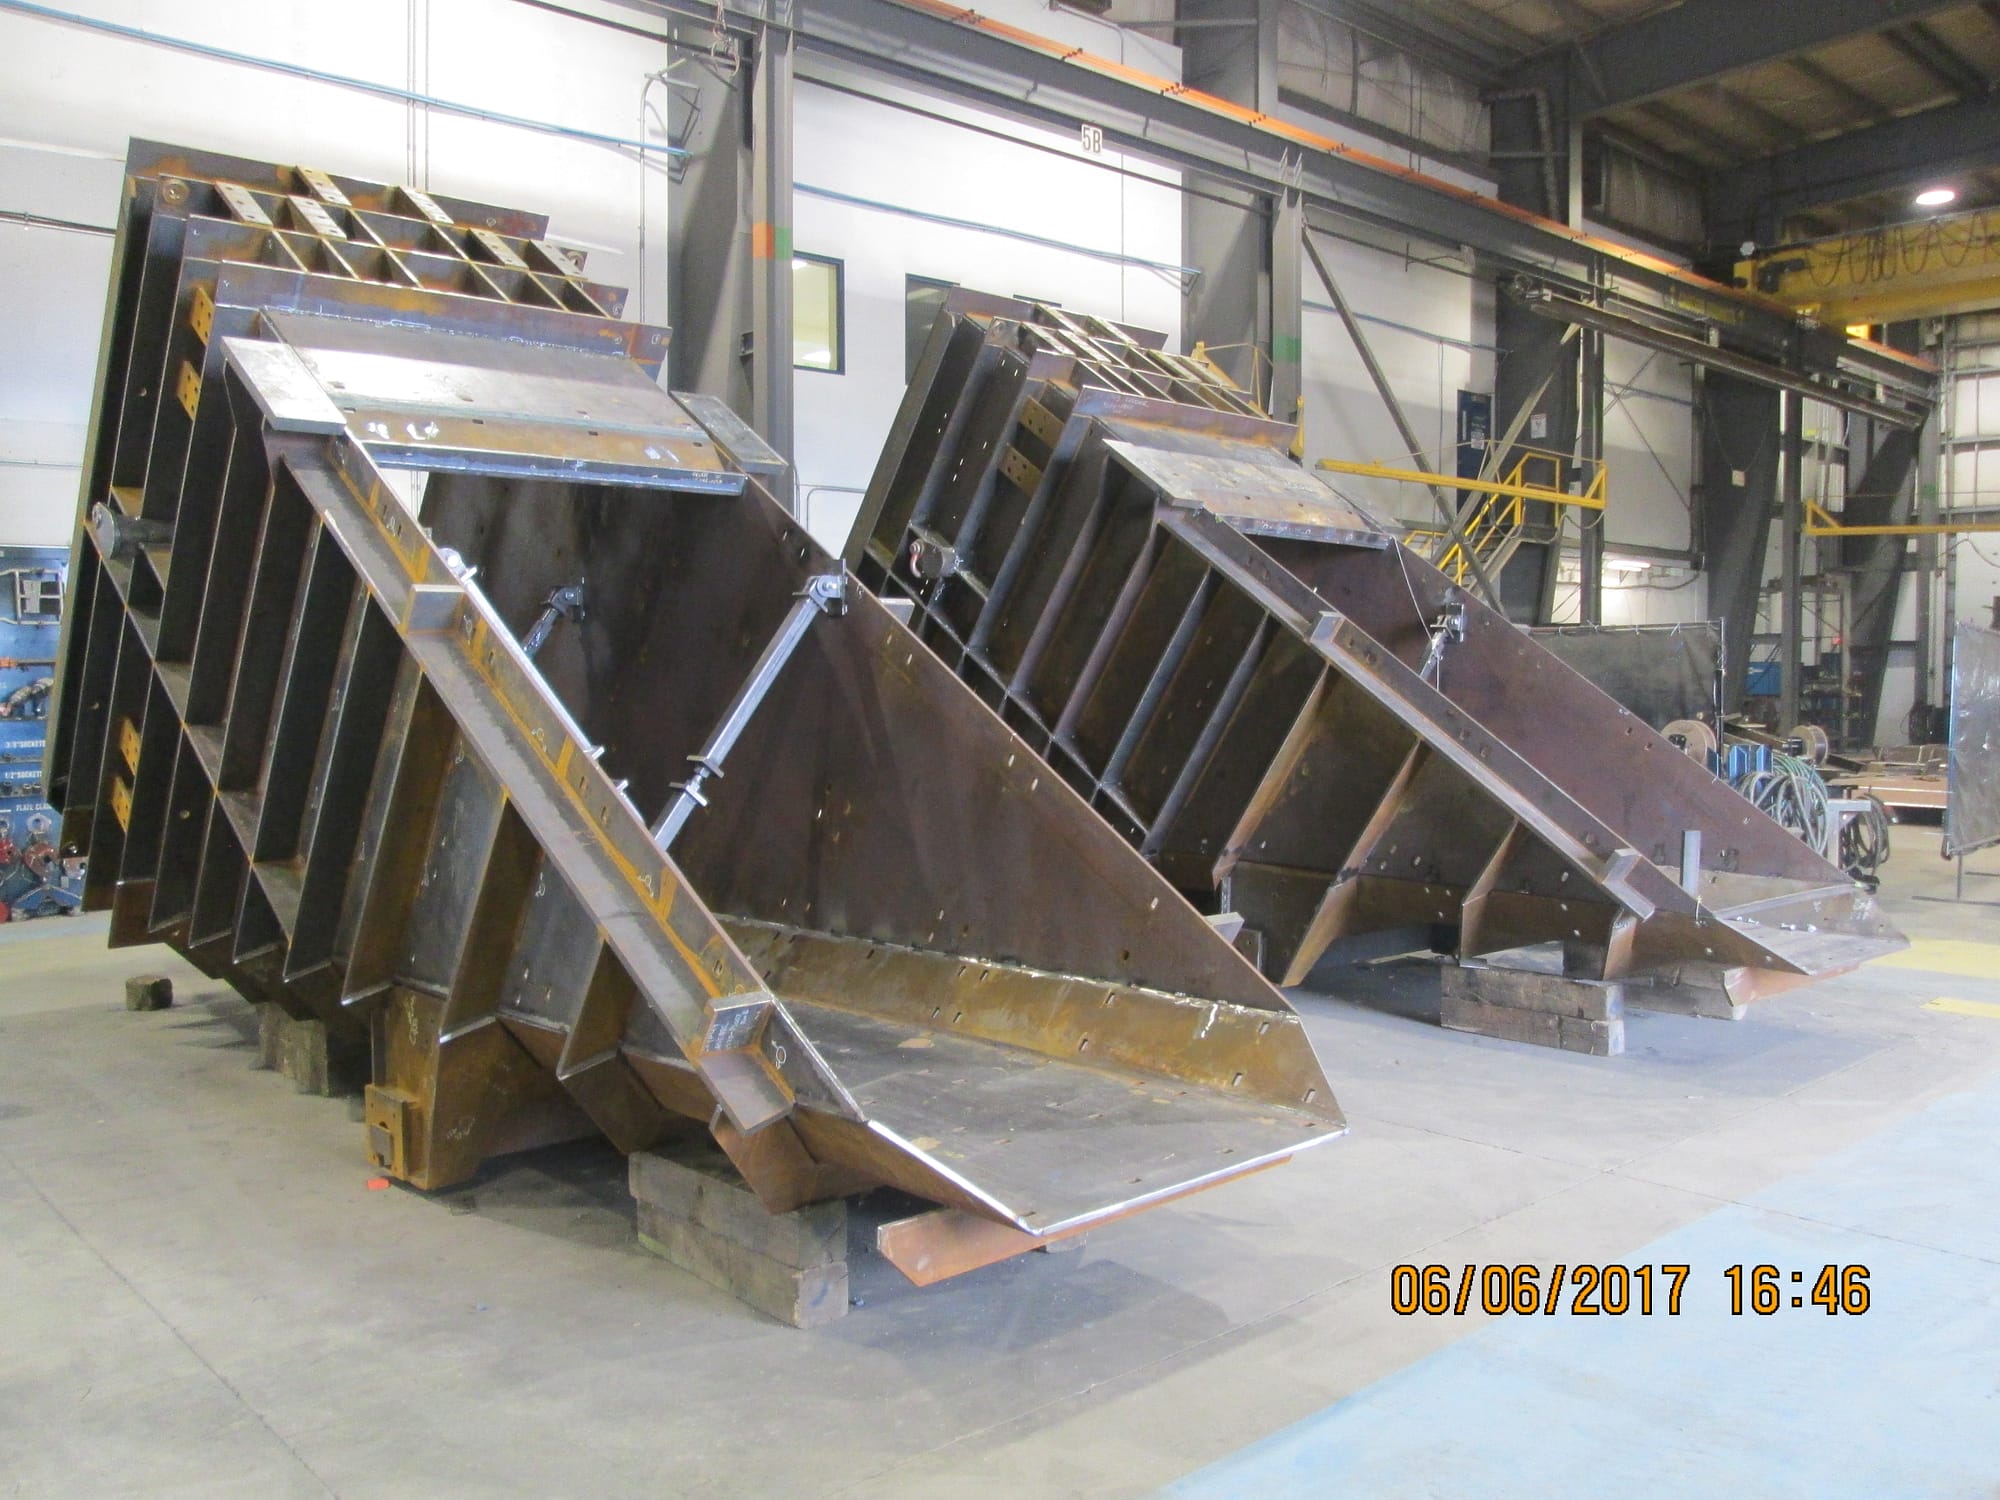 Mining Project - Structural Steel Fabrication of K3 Expansion Loading Pocket Flasks, Discharge Chutes and Diverter Gate